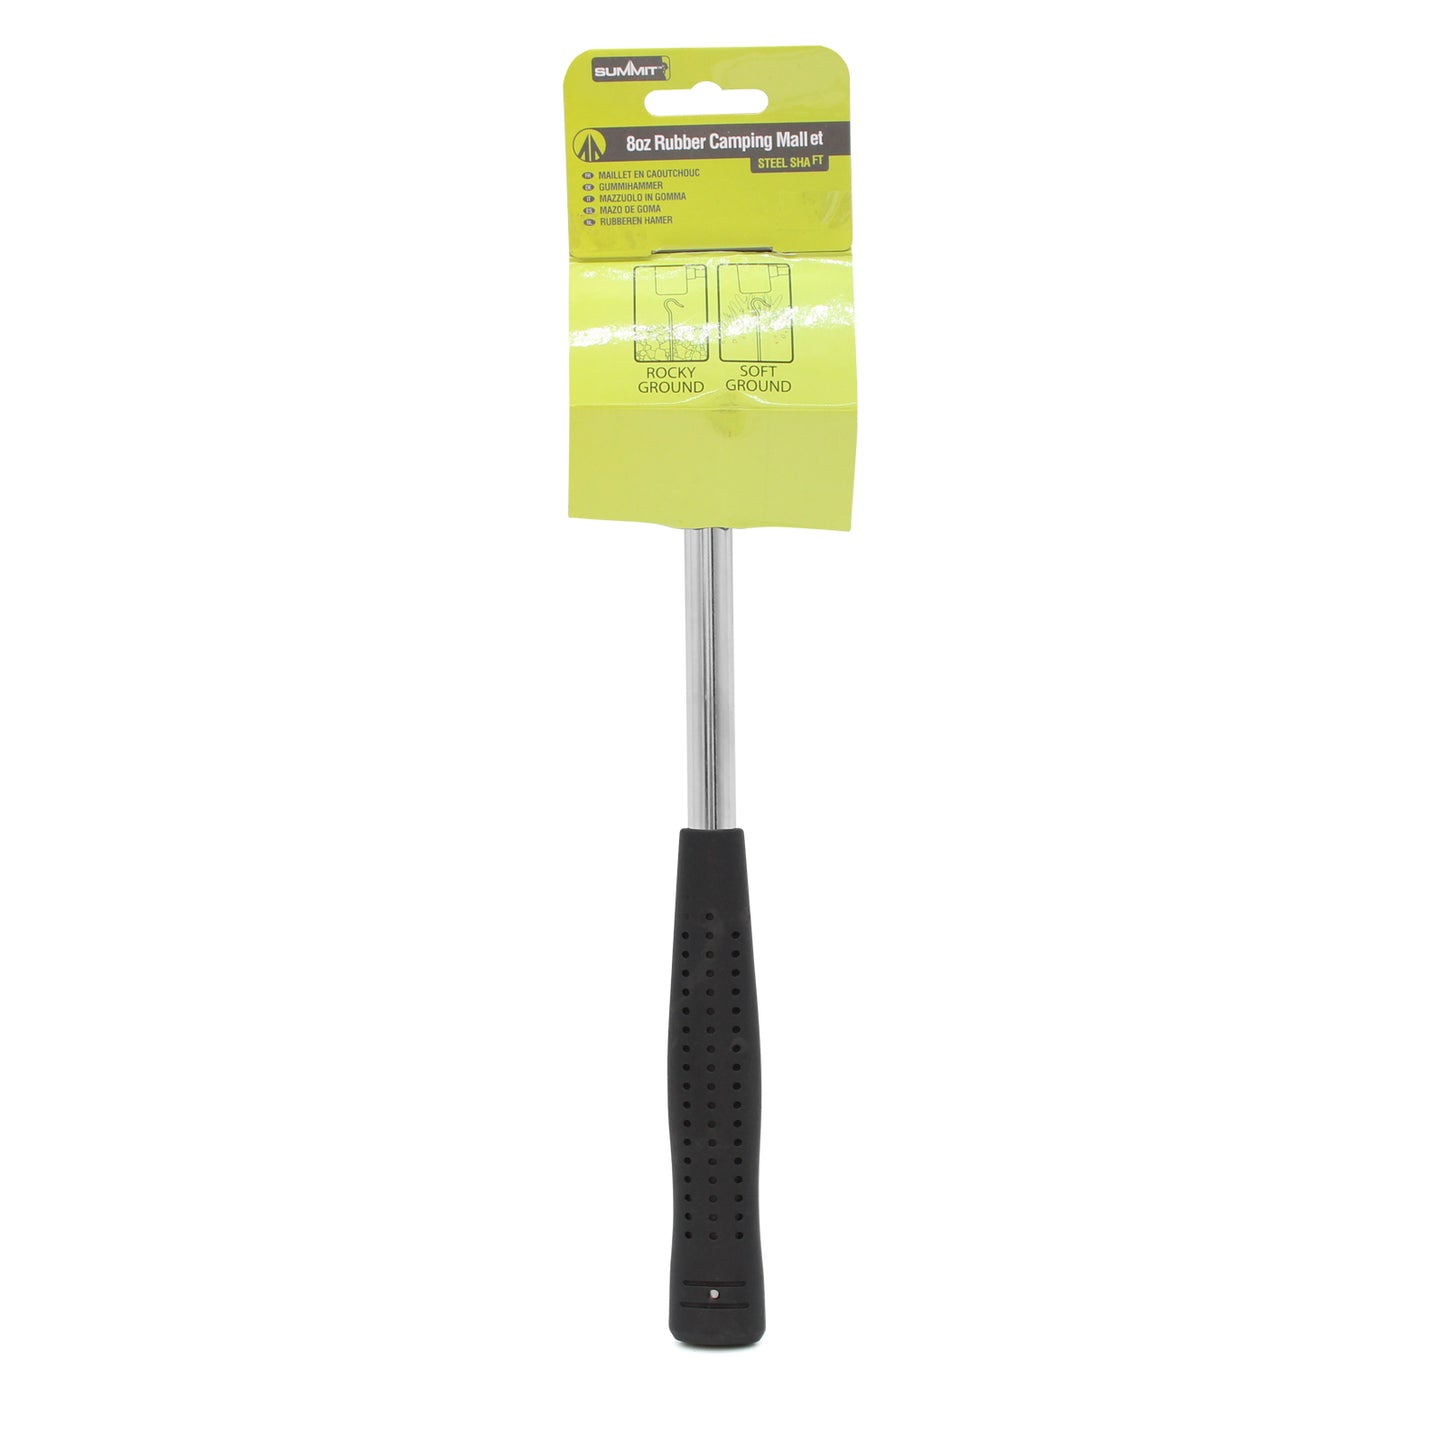 Rubber Camping Mallet in Packaging